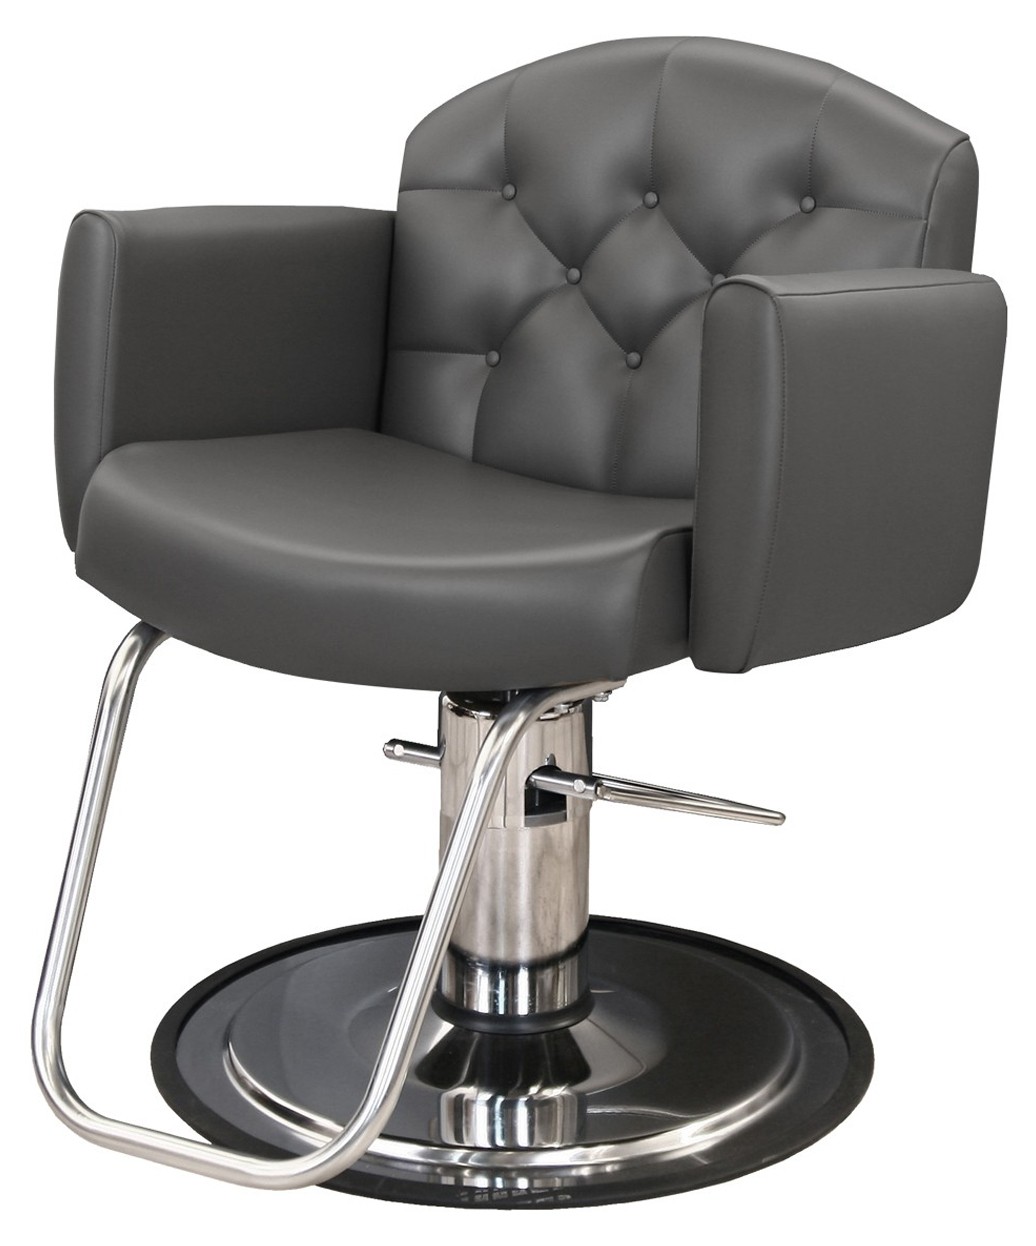 Collins 7100 Ashton Styling Chair